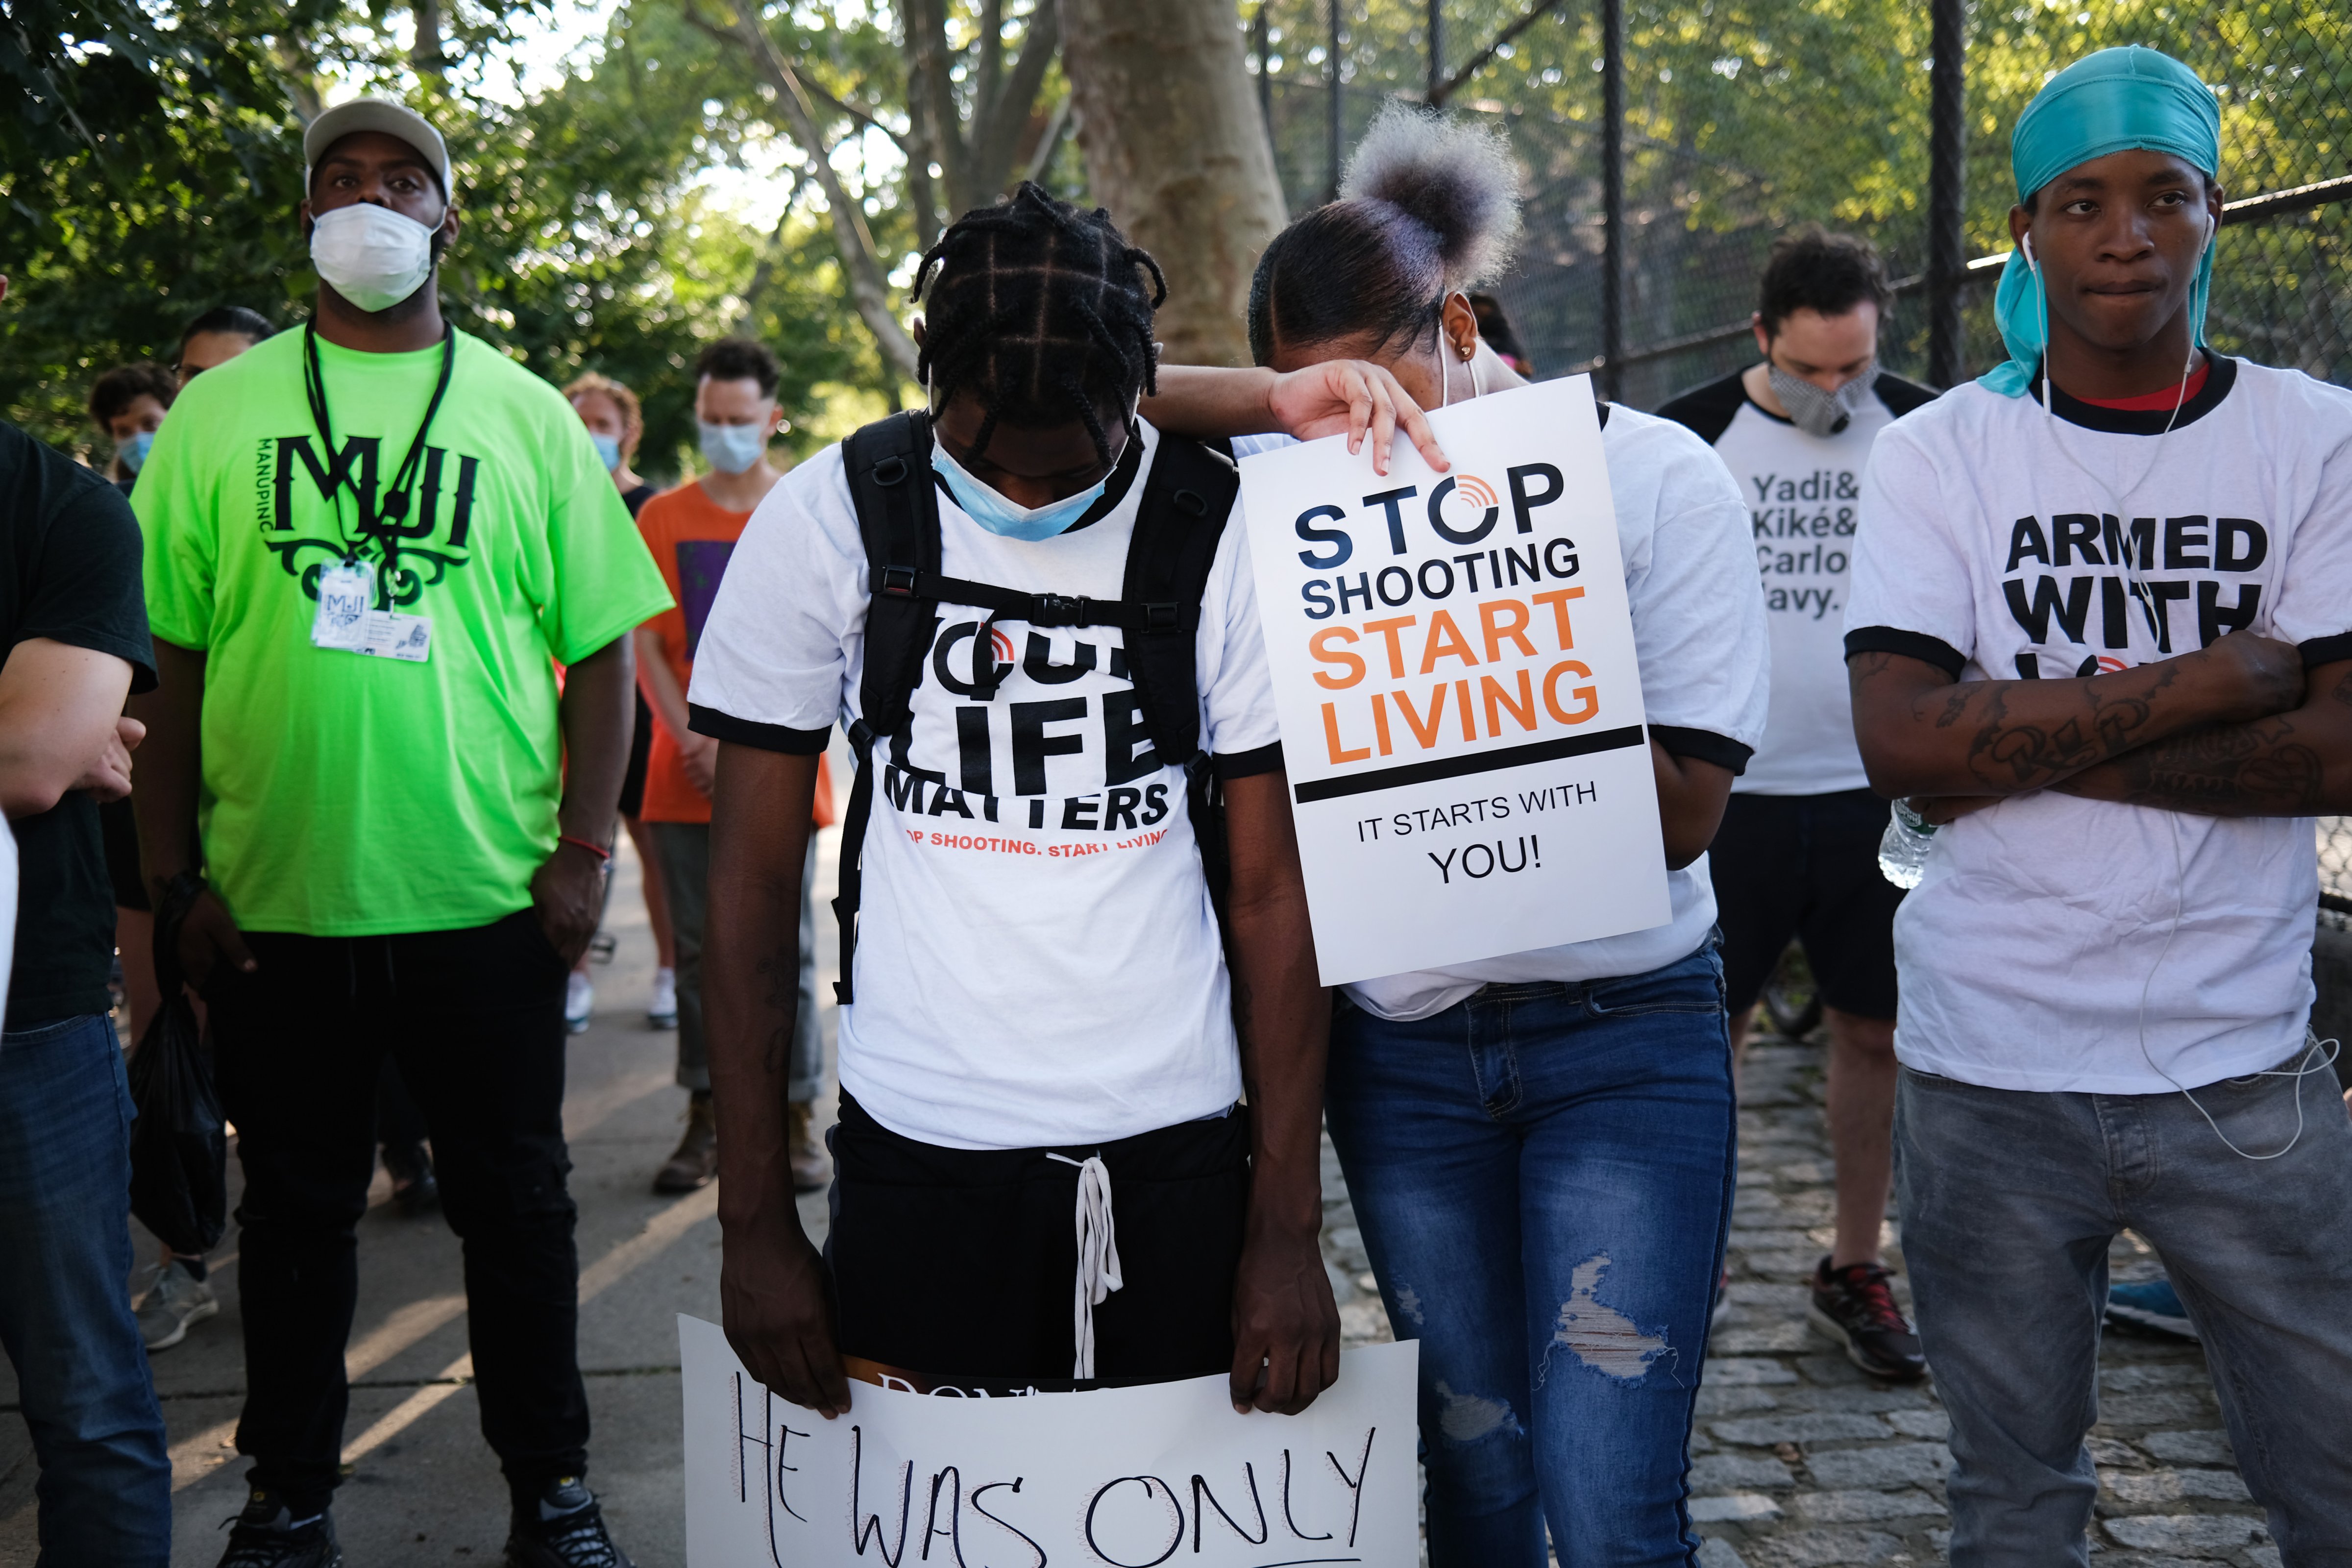 The group Save Our Streets (S.O.S.) holds a peace march in response to a surge in shootings in Brooklyn, New York on July 16, 2020. The march was held near the scene where a one-year-old child was recently shot and killed. (Spencer Platt—Getty Images)